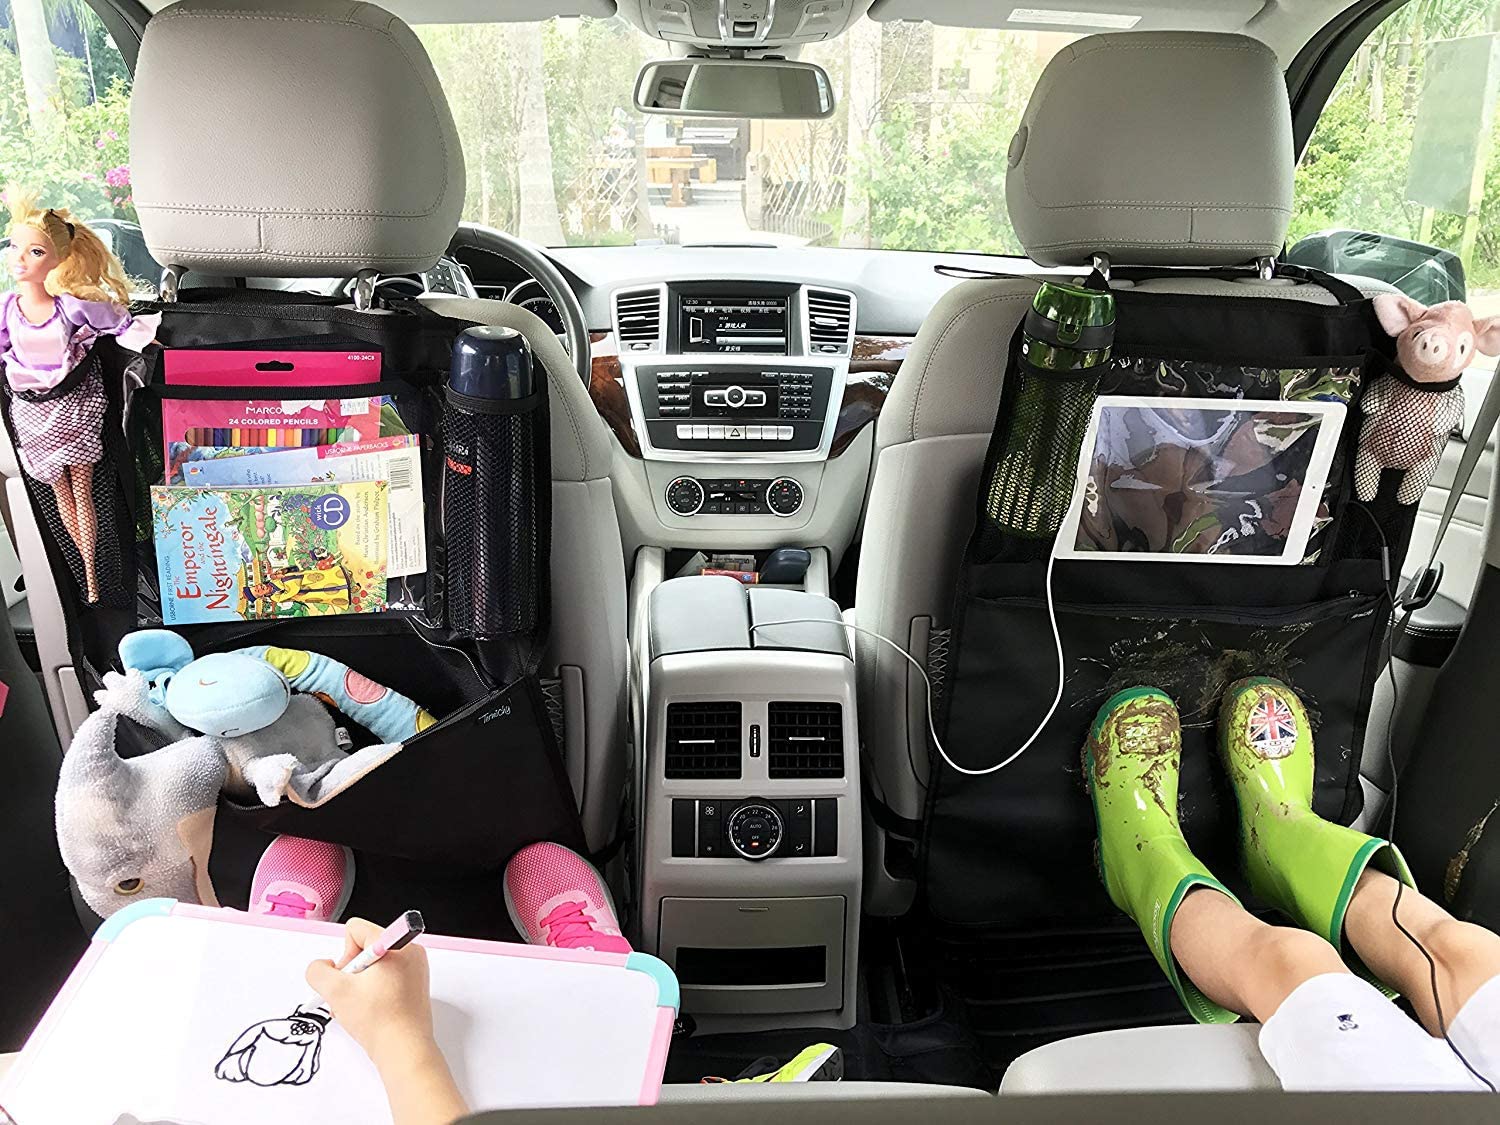 1680D Durable Backseat Toy Organizer Car Backseat Protector with 8 Storage Pockets for Tissue Box Toys Book Bottle Drinks Kids Baby Toddler Travel Accessories MAXTUF Kick Mat Gray 